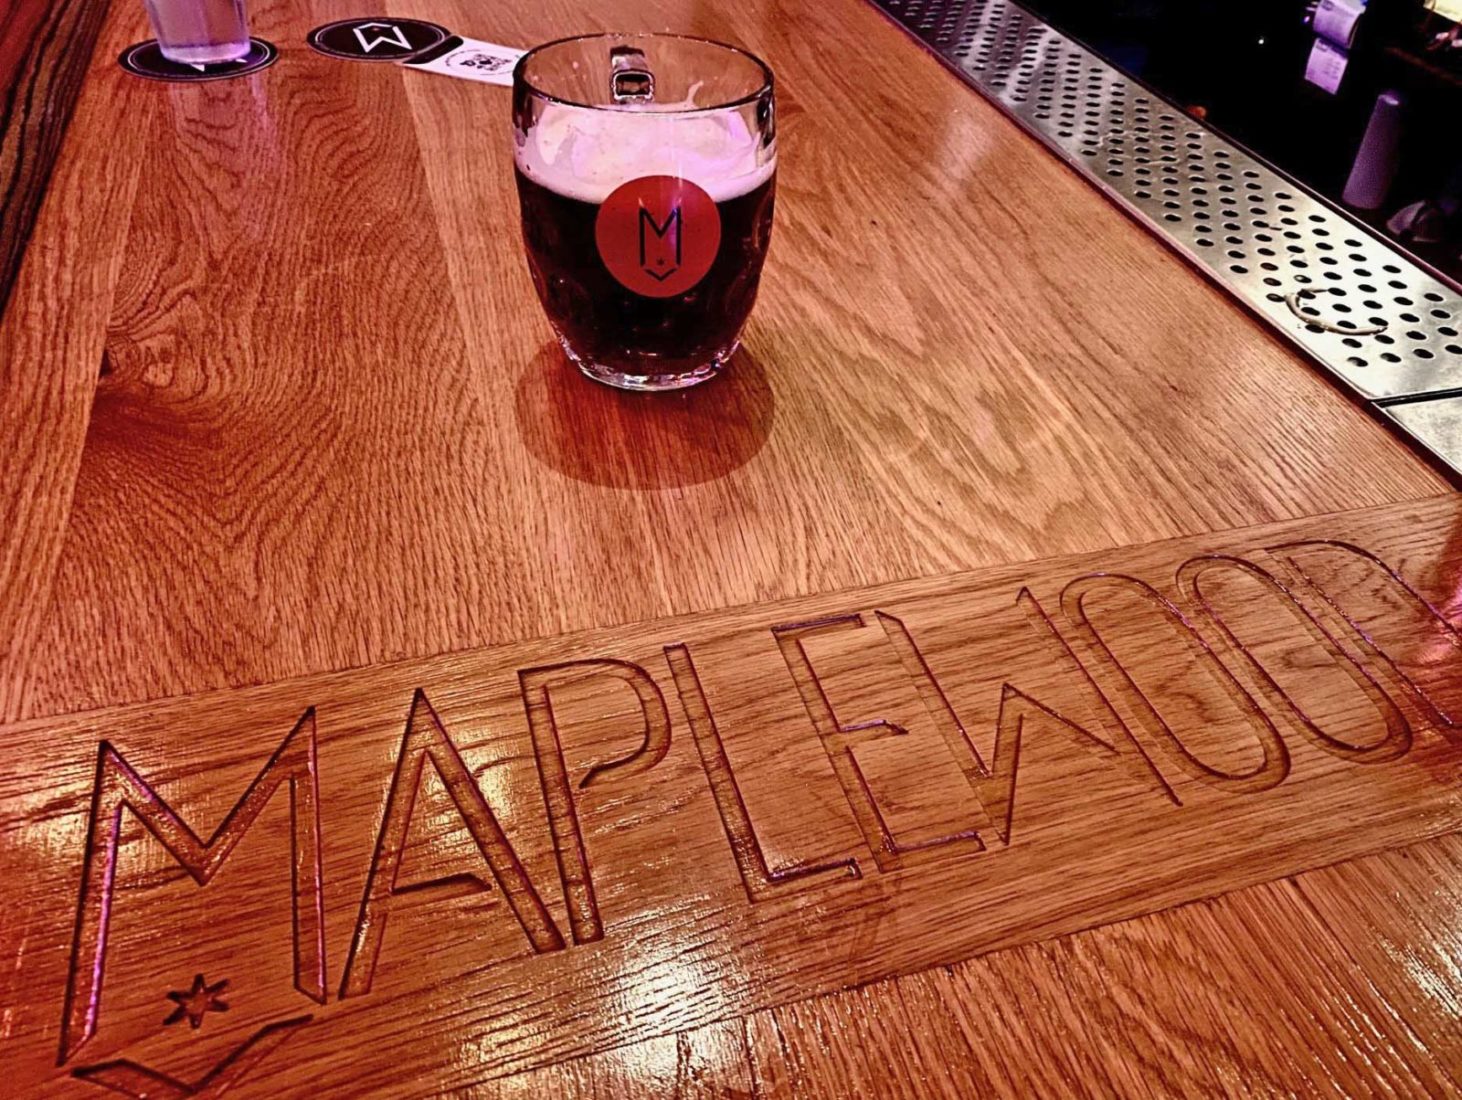 500. Maplewood Brewing Co, Chicago IL, 2021